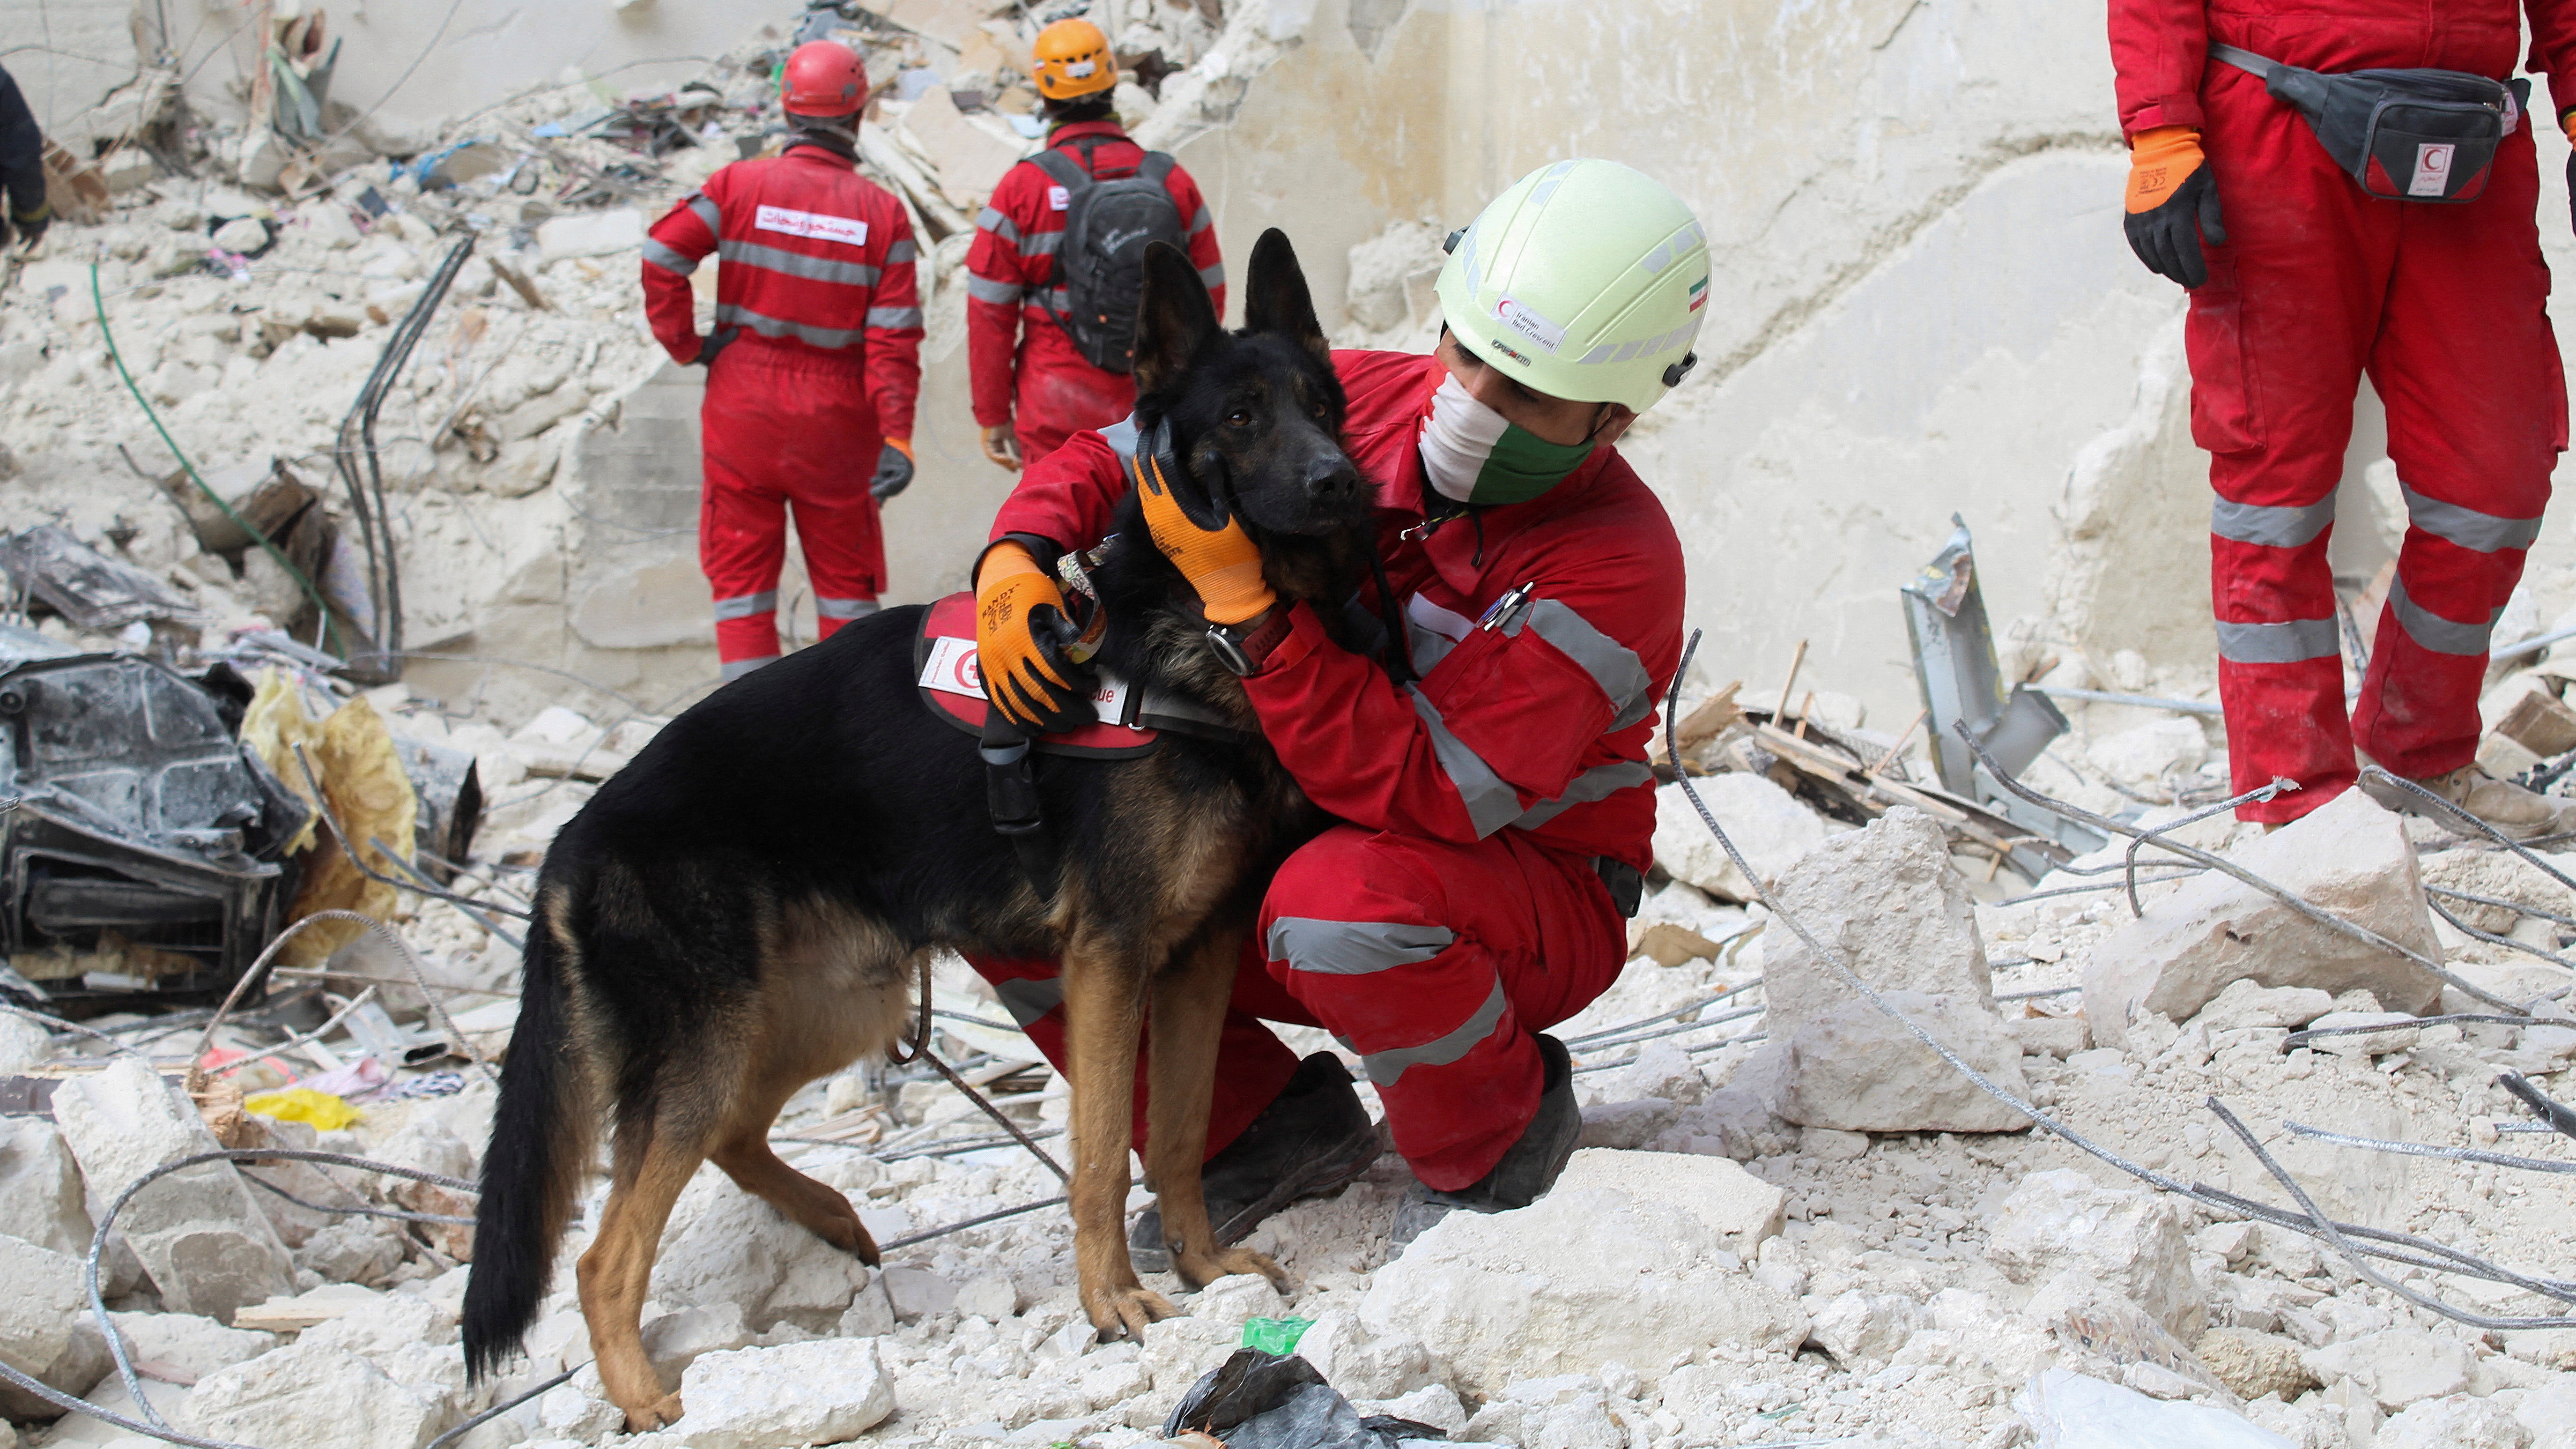 A member of the Iranian rescue team holds a rescue dog as he stands amid the rubble of a damaged building in Aleppo. /Firas Makdesi/Reuters